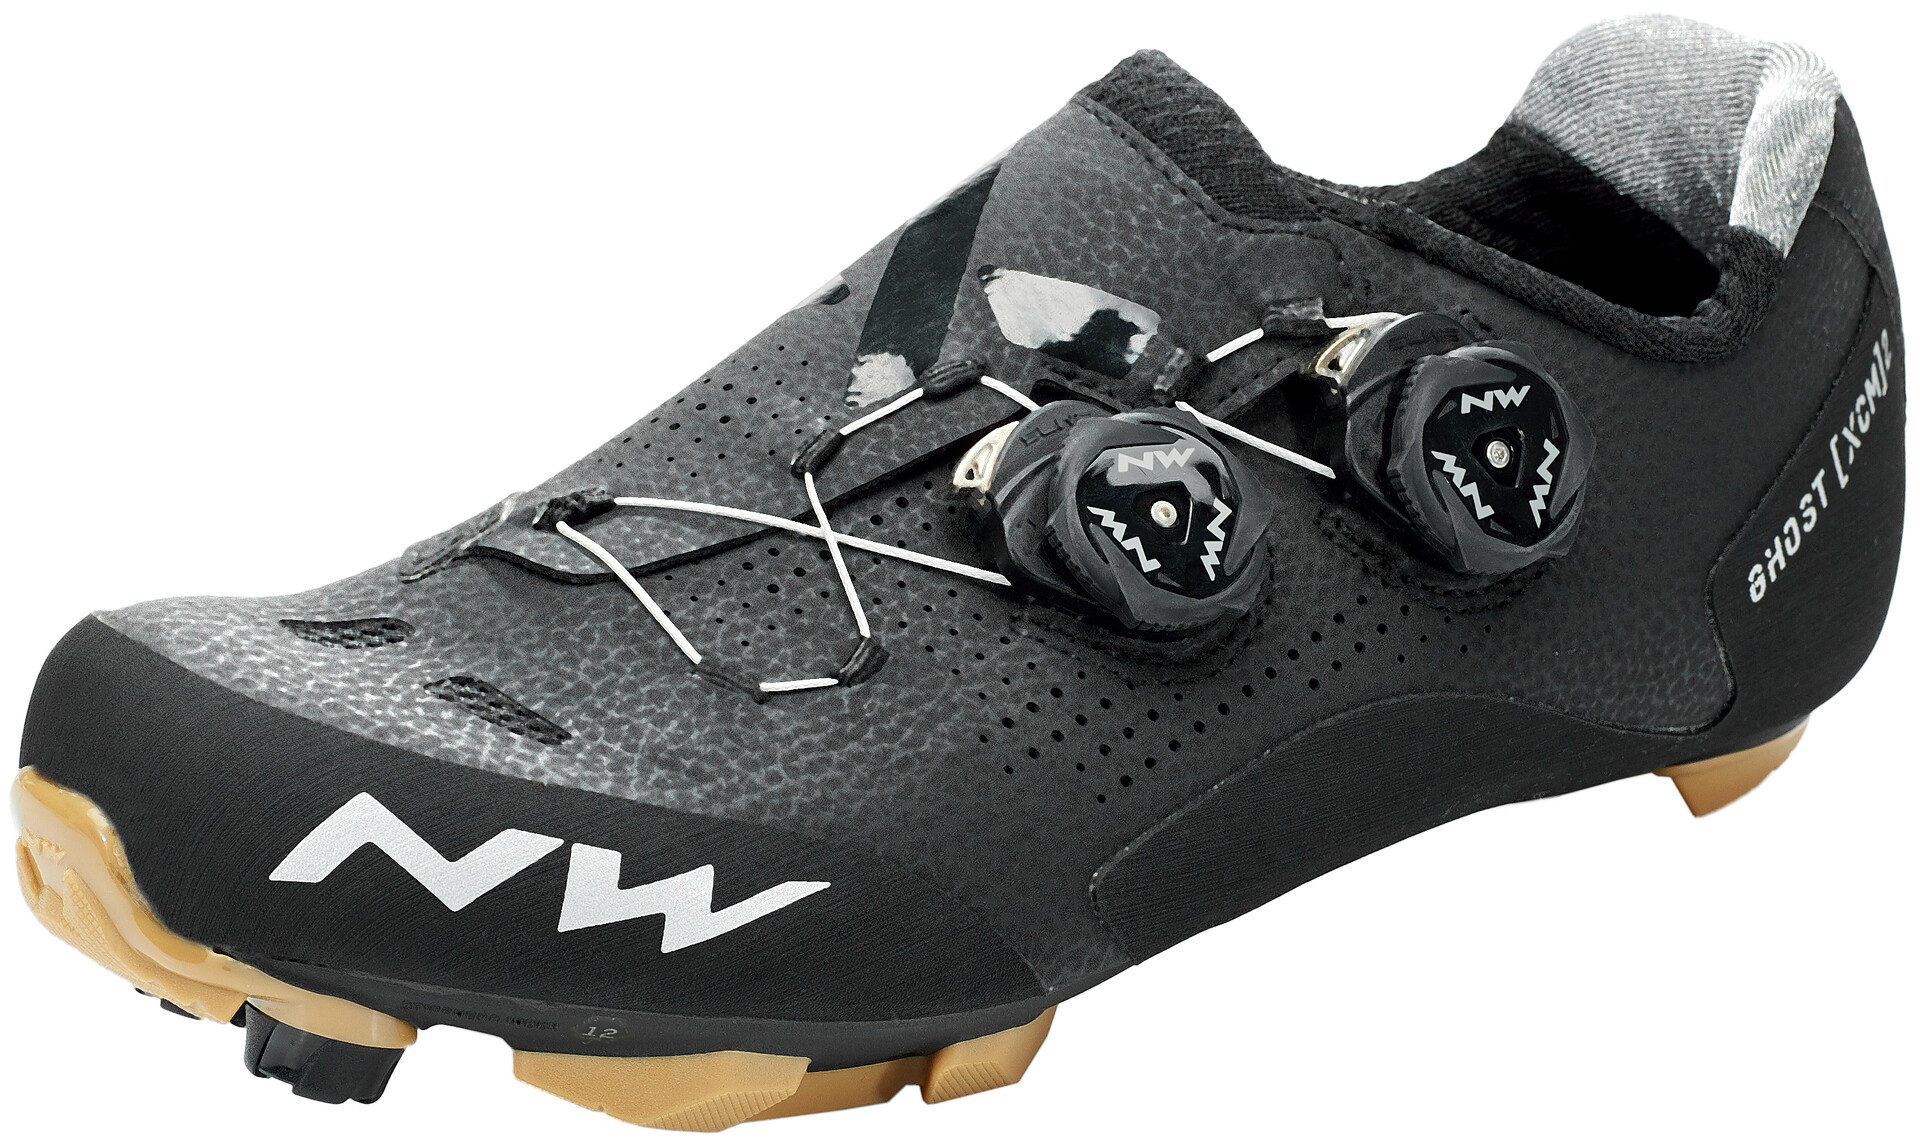 northwave ghost xcm mtb shoes